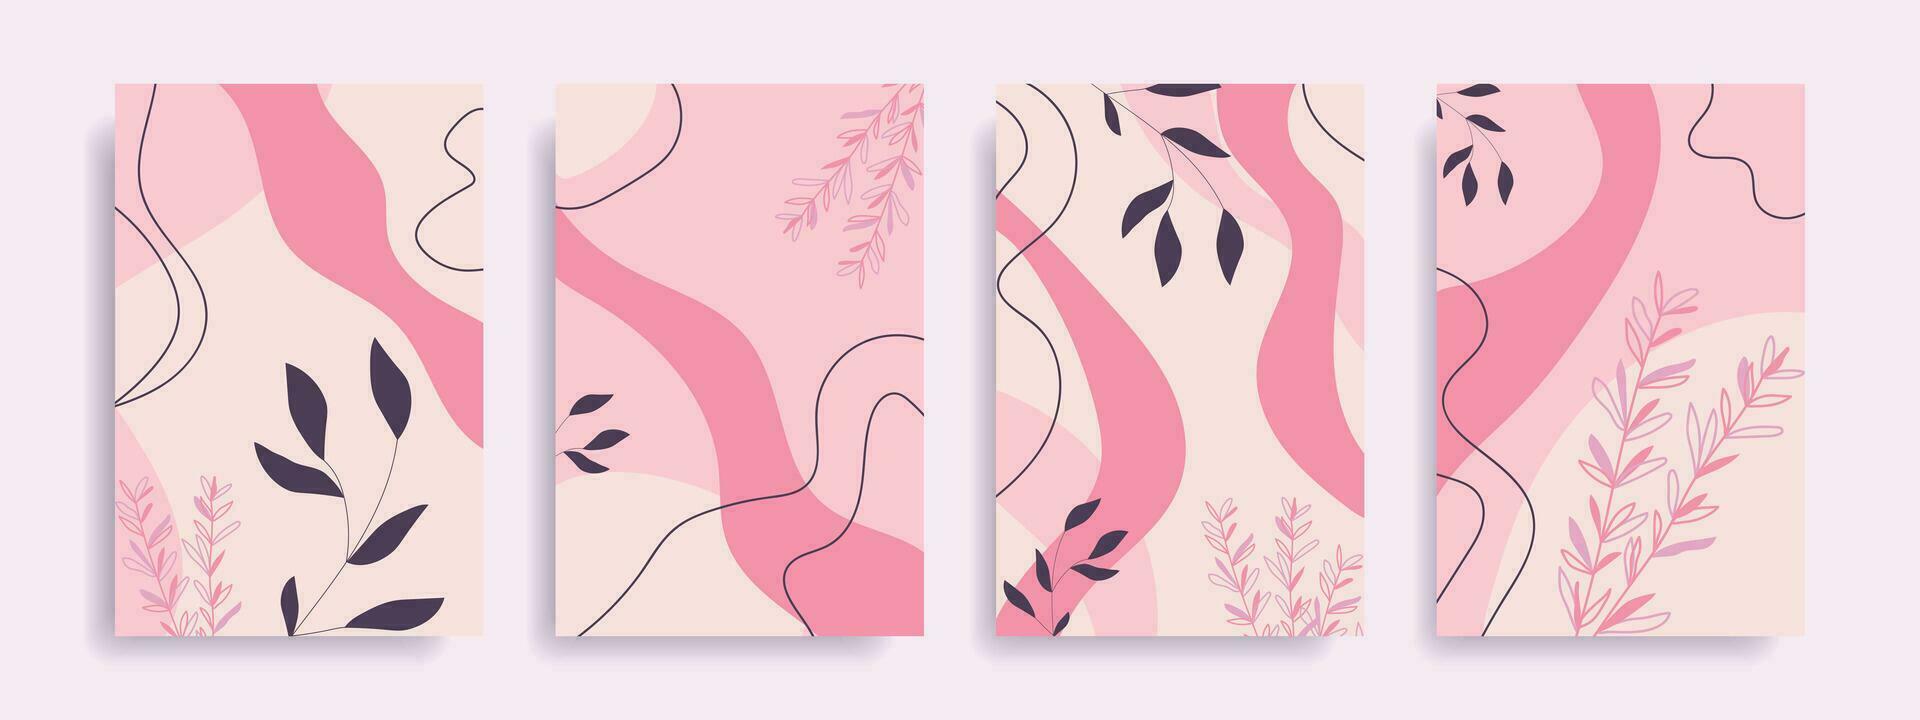 Floral modern abstract backgrounds in pink tones. Poster with flowers. vector